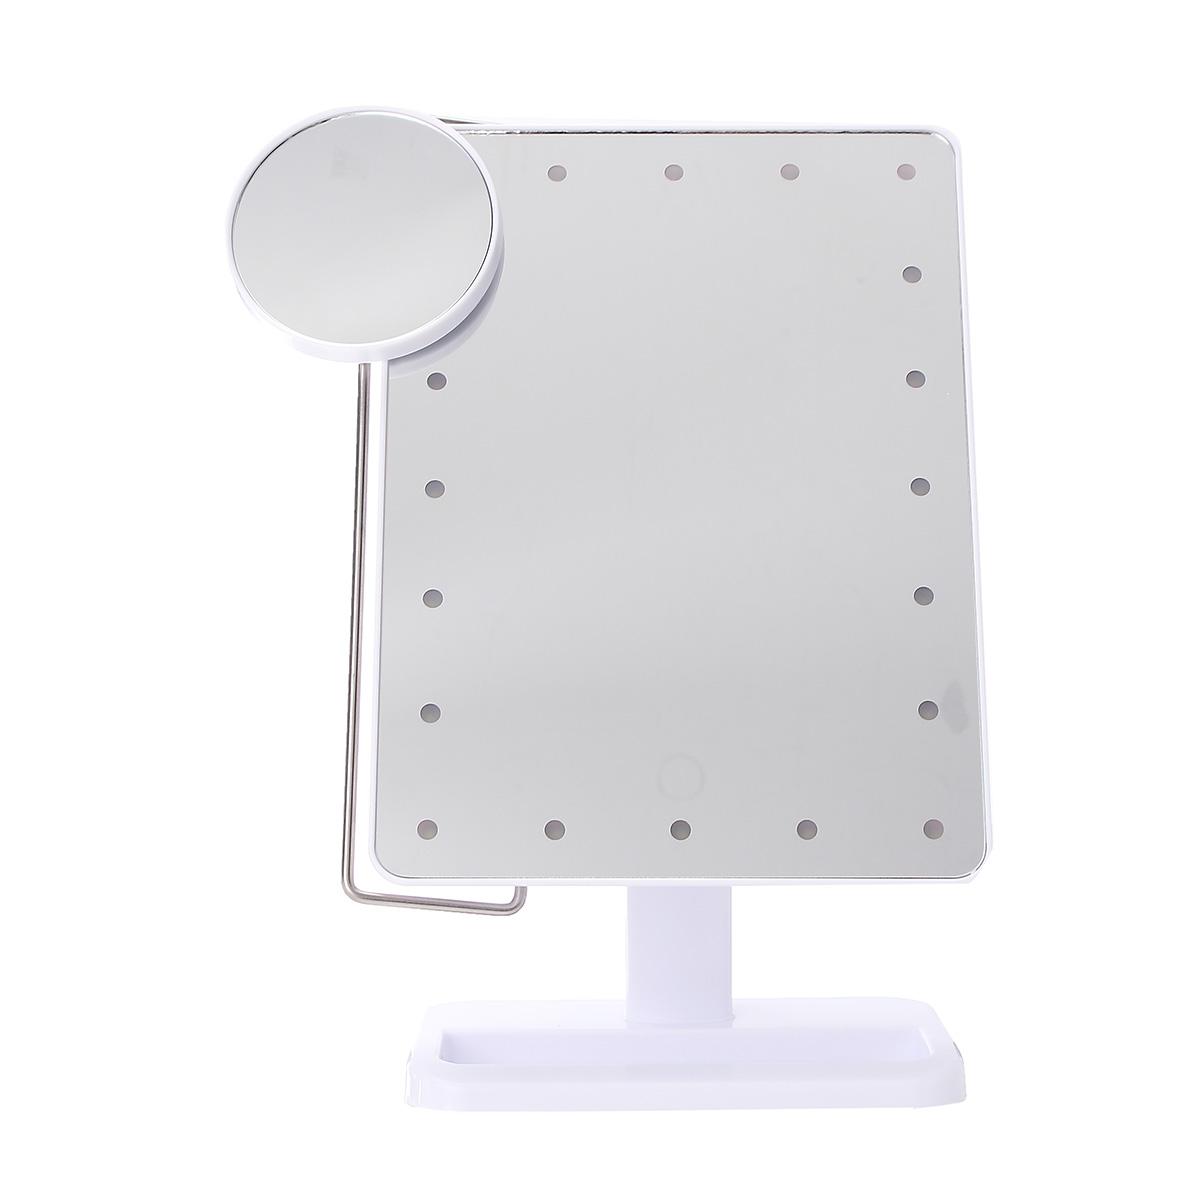 Clearance Sale New Led Touch Screen Makeup Mirror Professional Vanity Mirror 20 Led Lights Adjustable Countertop 180 Rotating Free Magnifier White Buy Online At Best Prices In Pakistan Daraz Pk